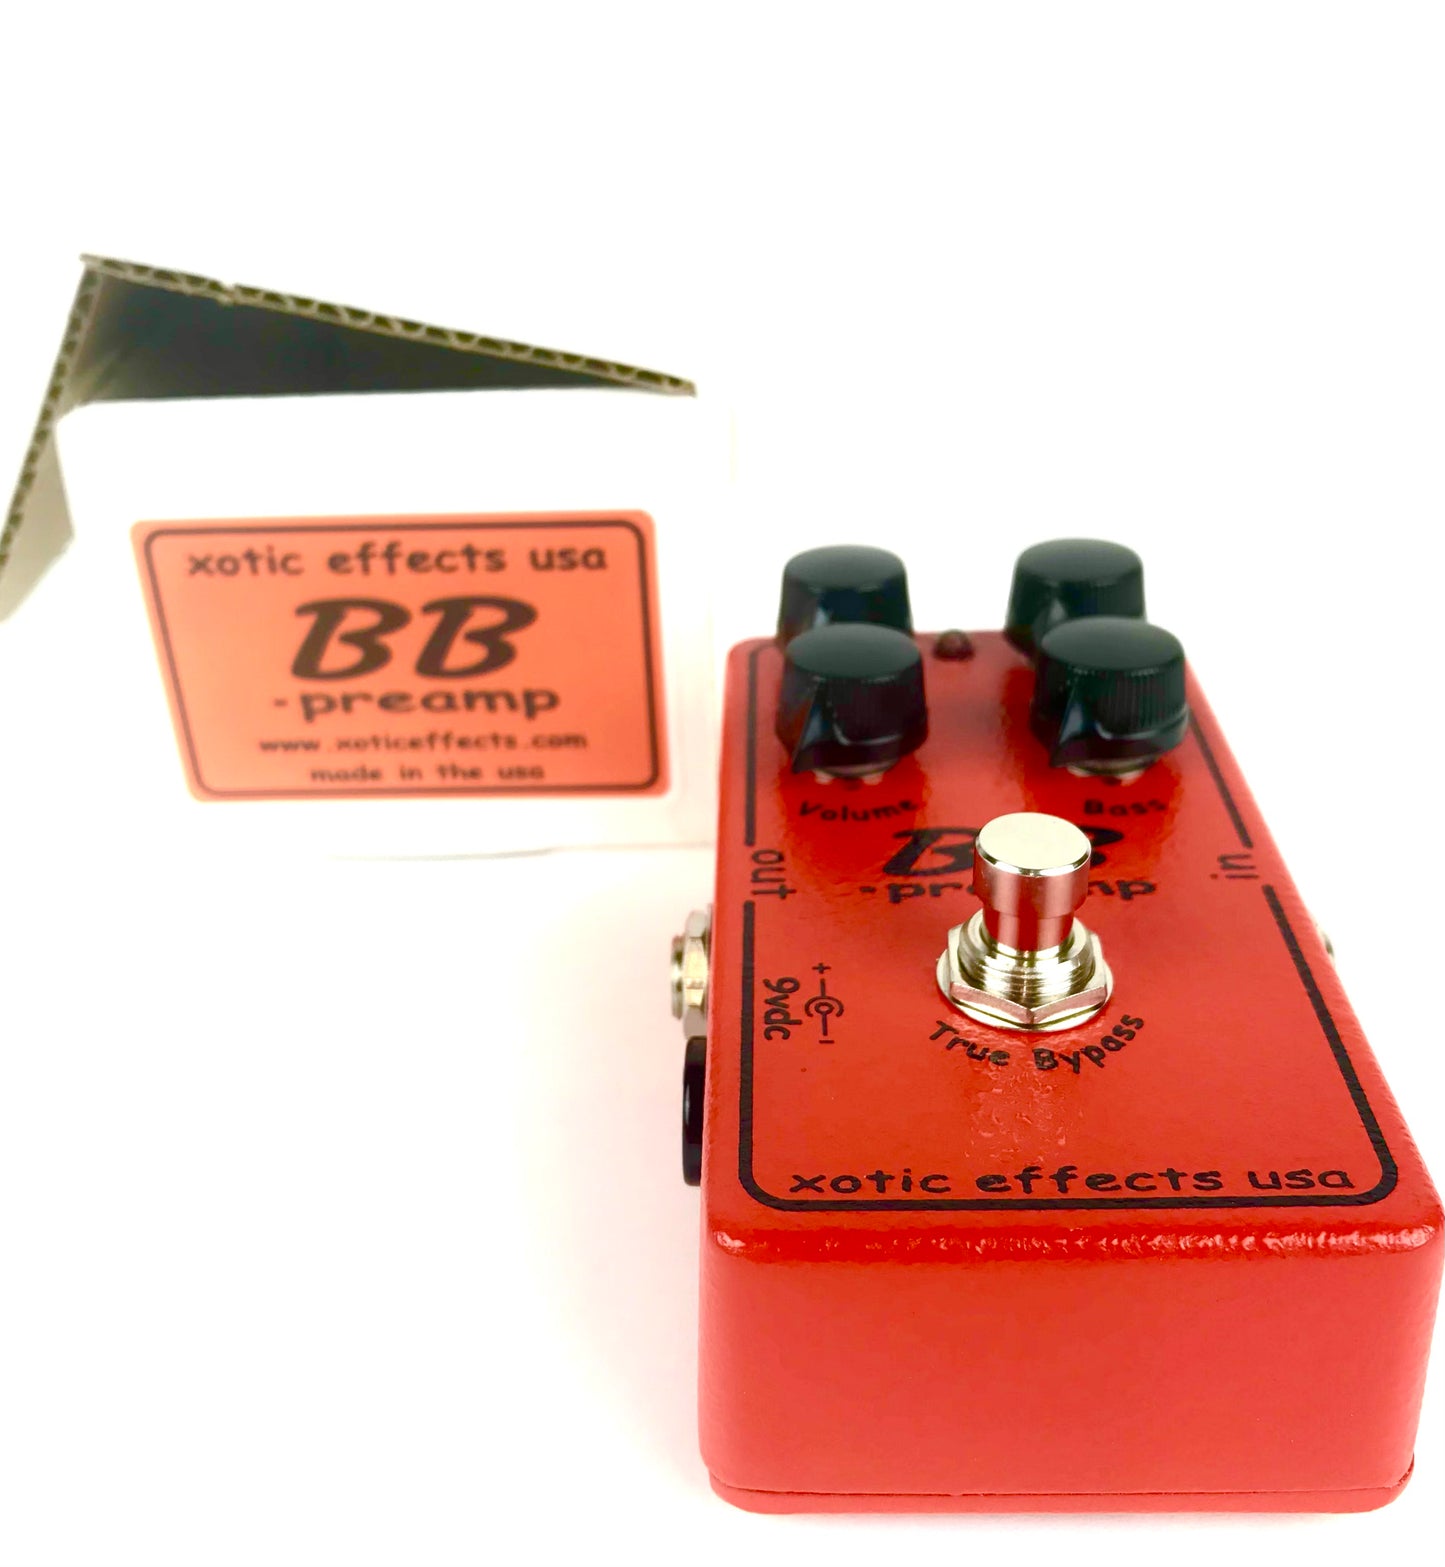 BB Preamp, new old stock (N.O.S.)